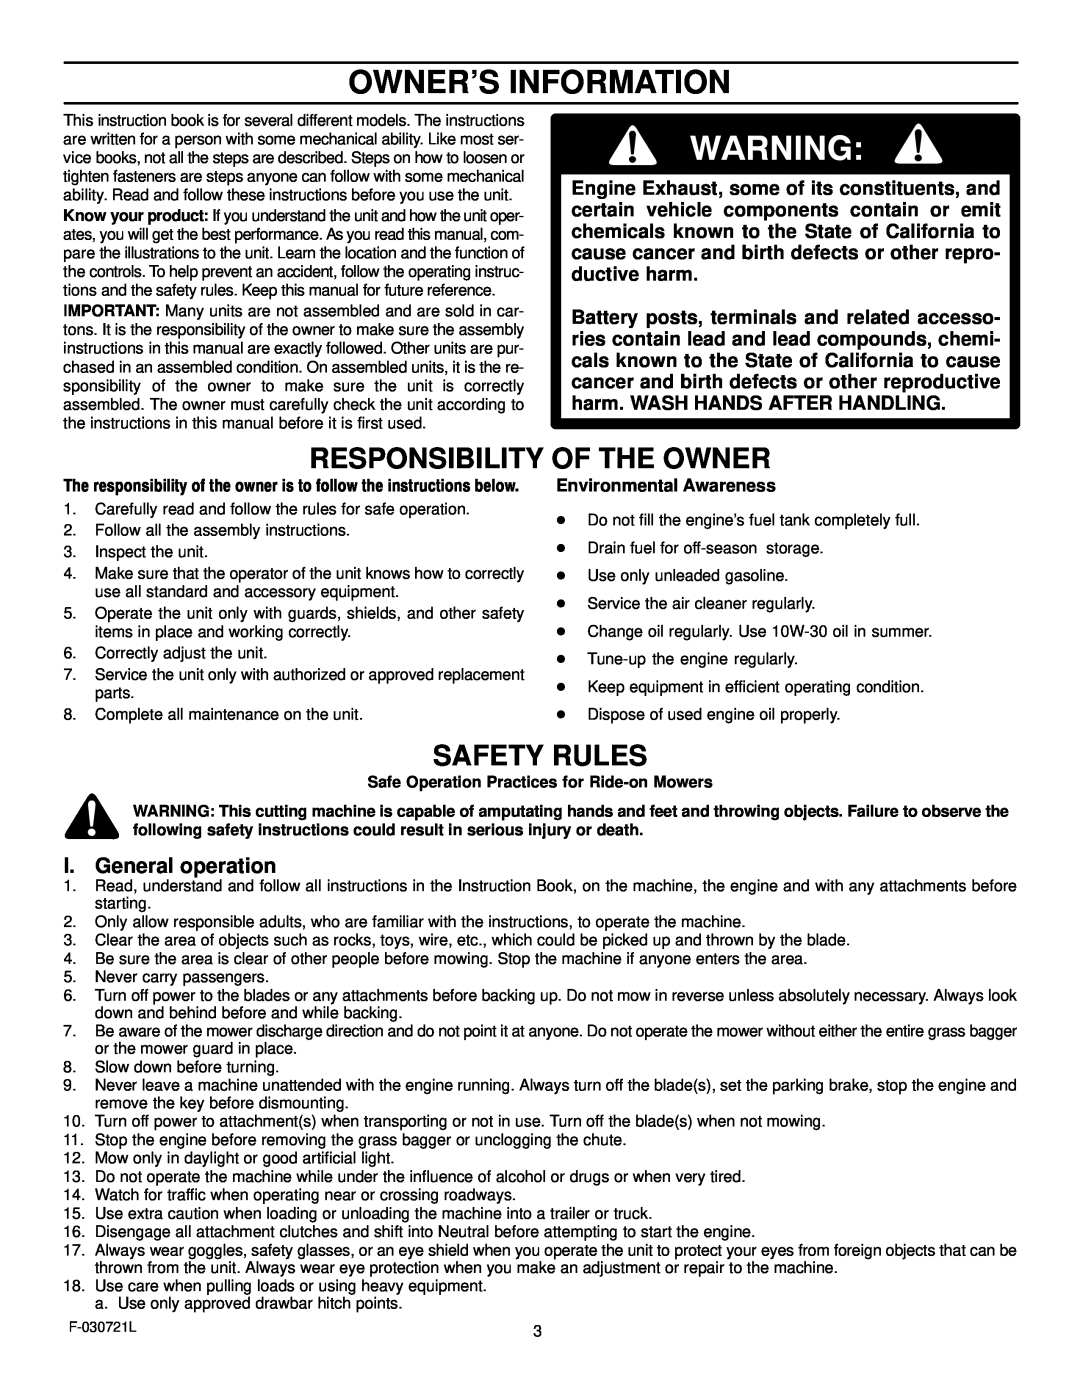 Murray 425007x92B manual Owner’S Information, Responsibility Of The Owner, Safety Rules, I. General operation 